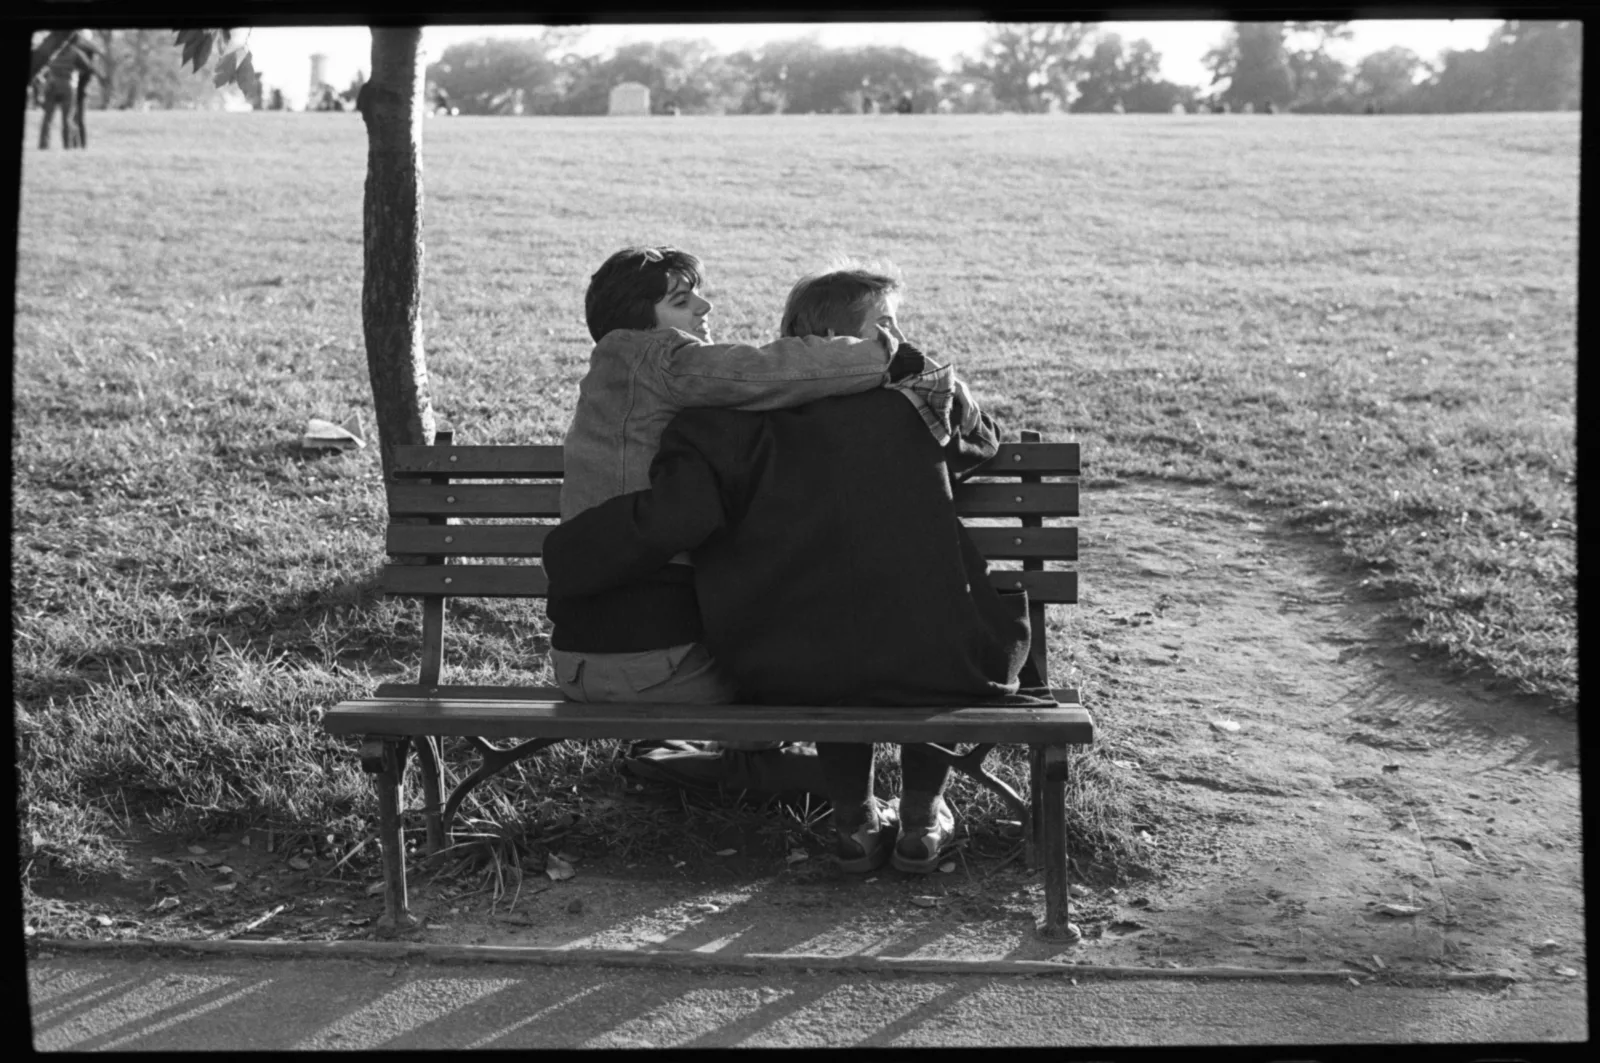 Two people sit and embrace on a park bench.